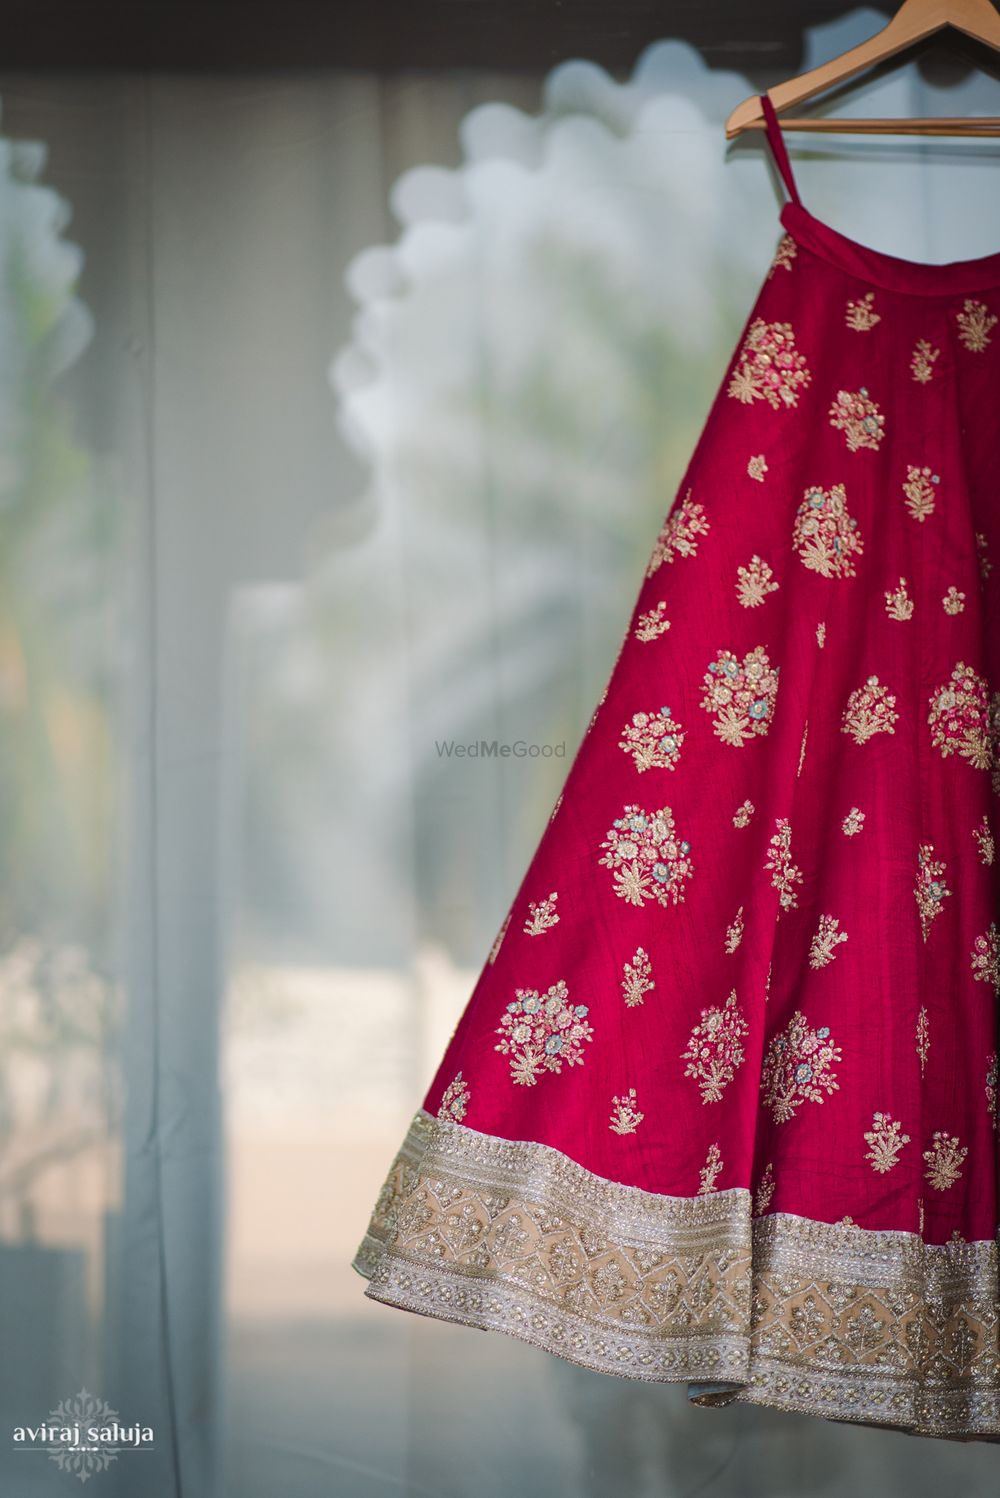 Photo of Red bridal lehenga on hanger with gold motifs